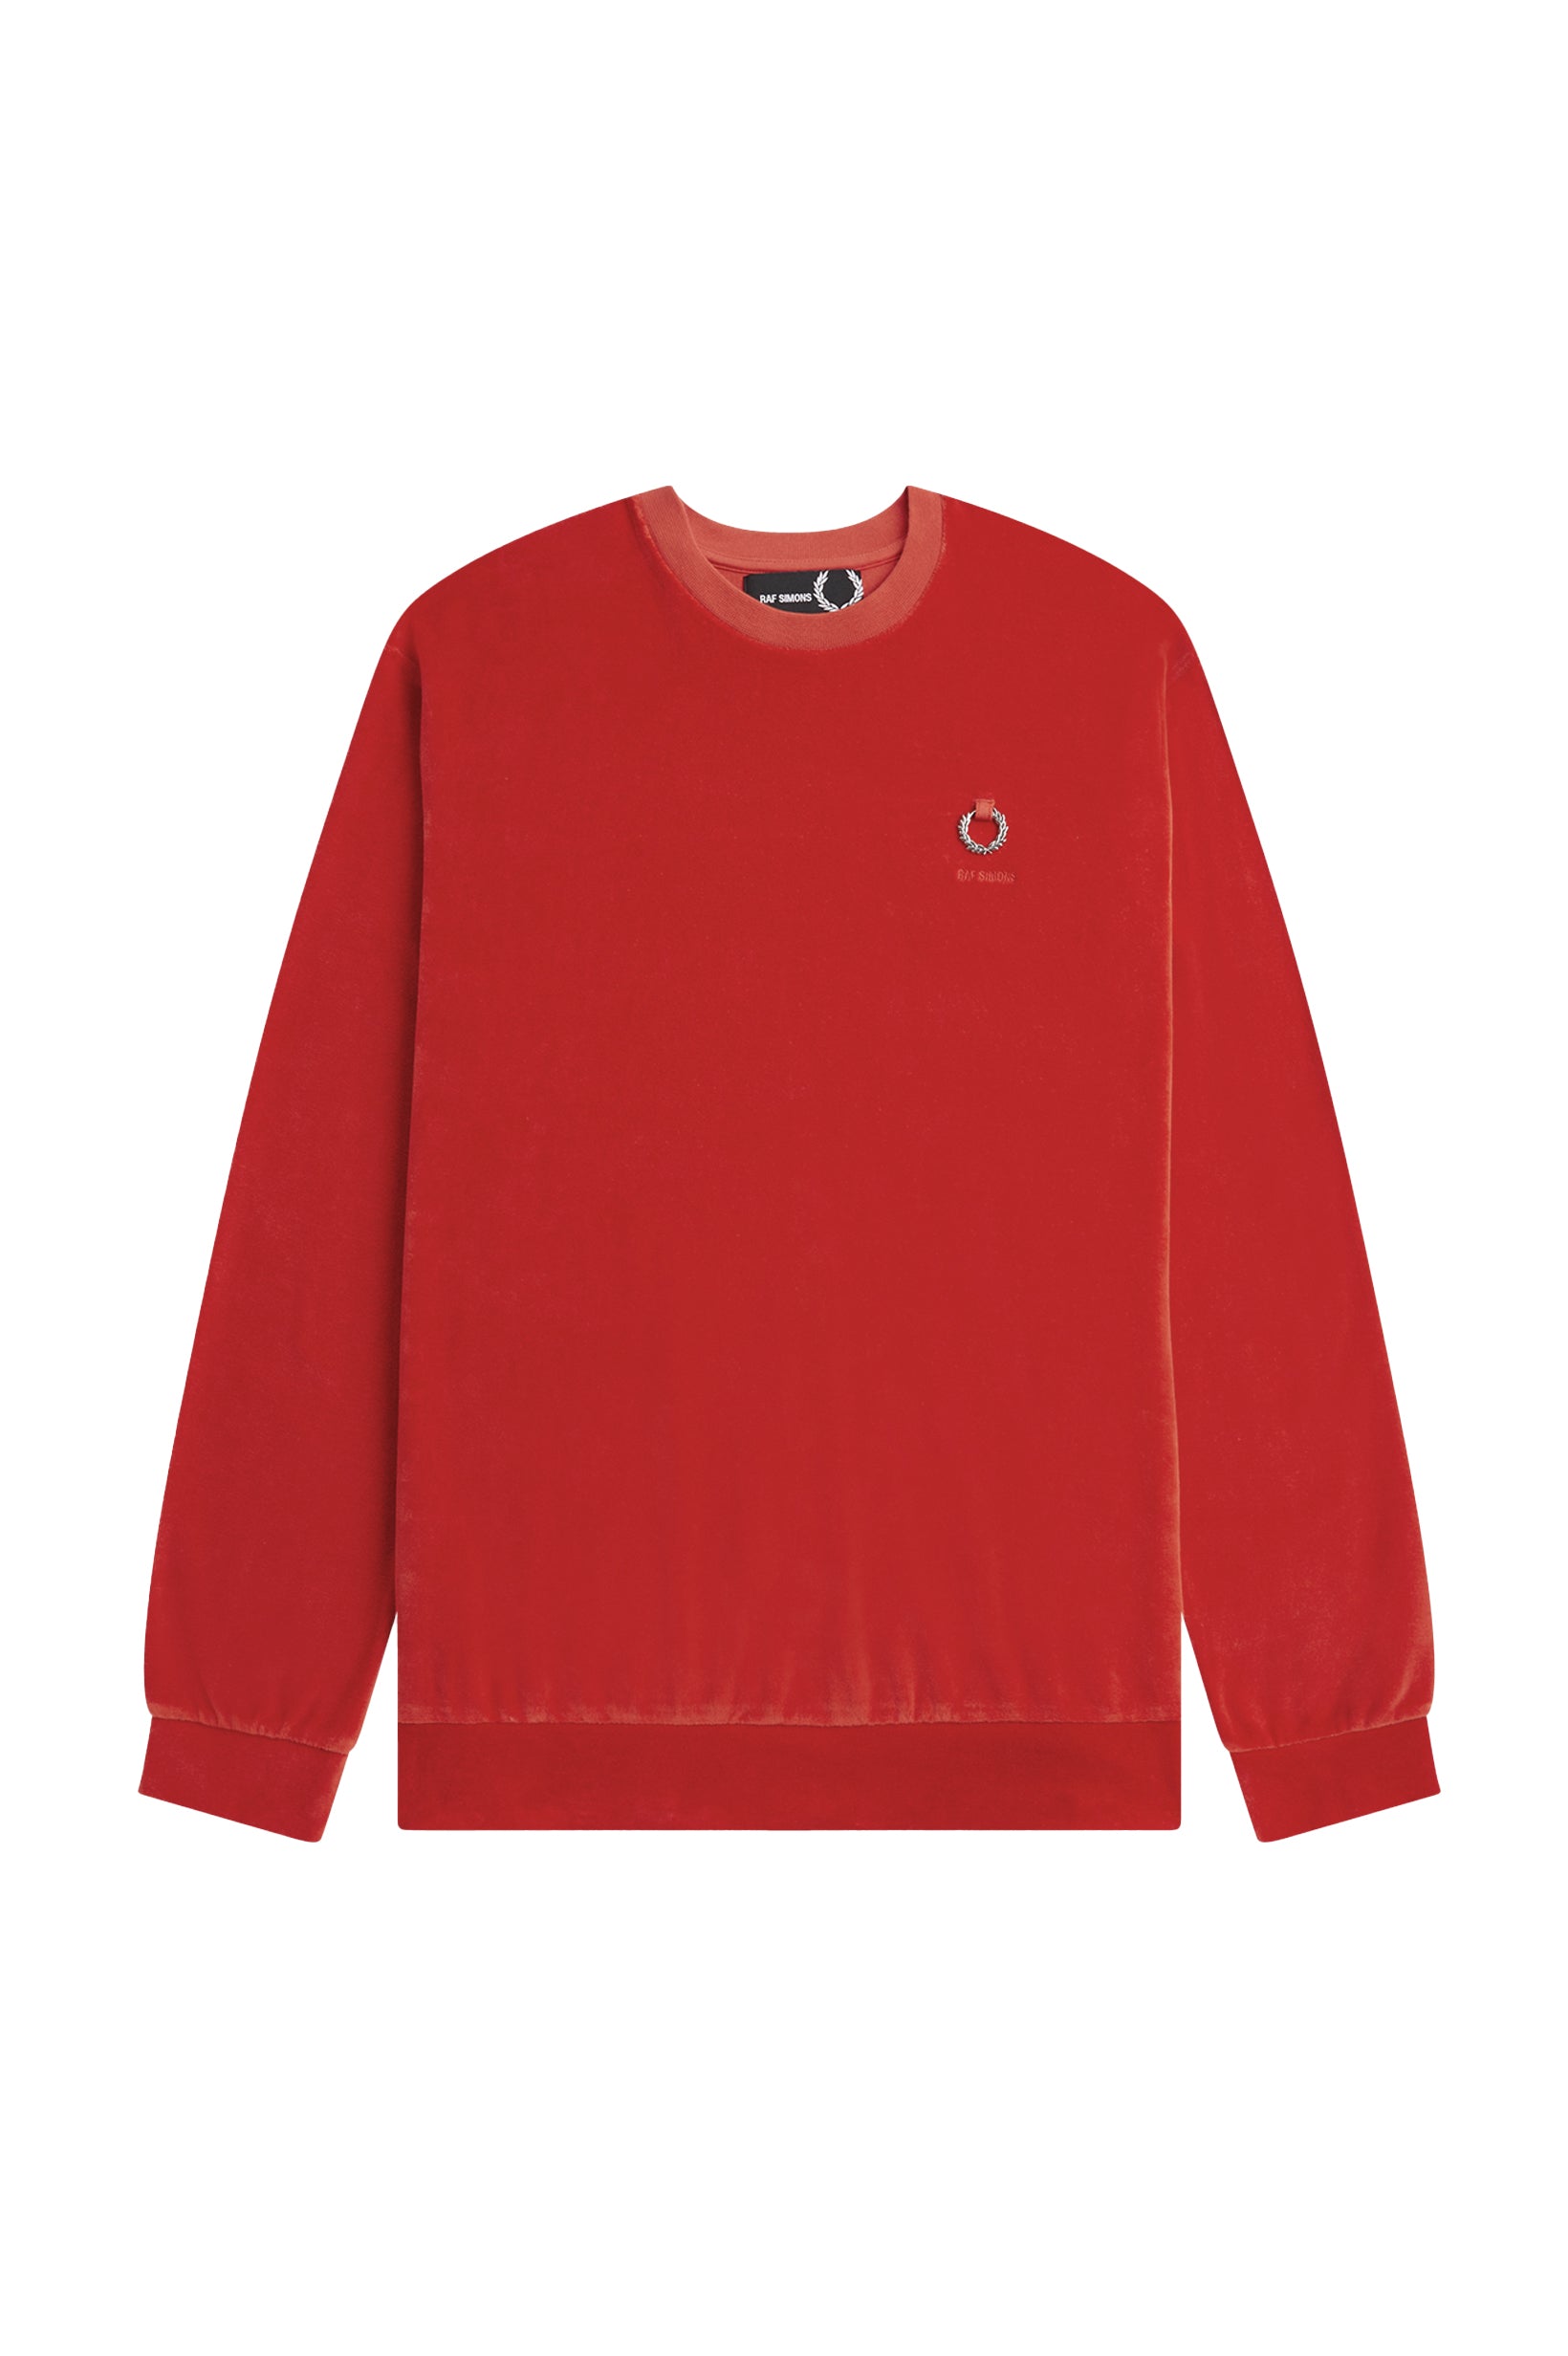 Fred Perry x Raf Simons | SNEAKERBOX